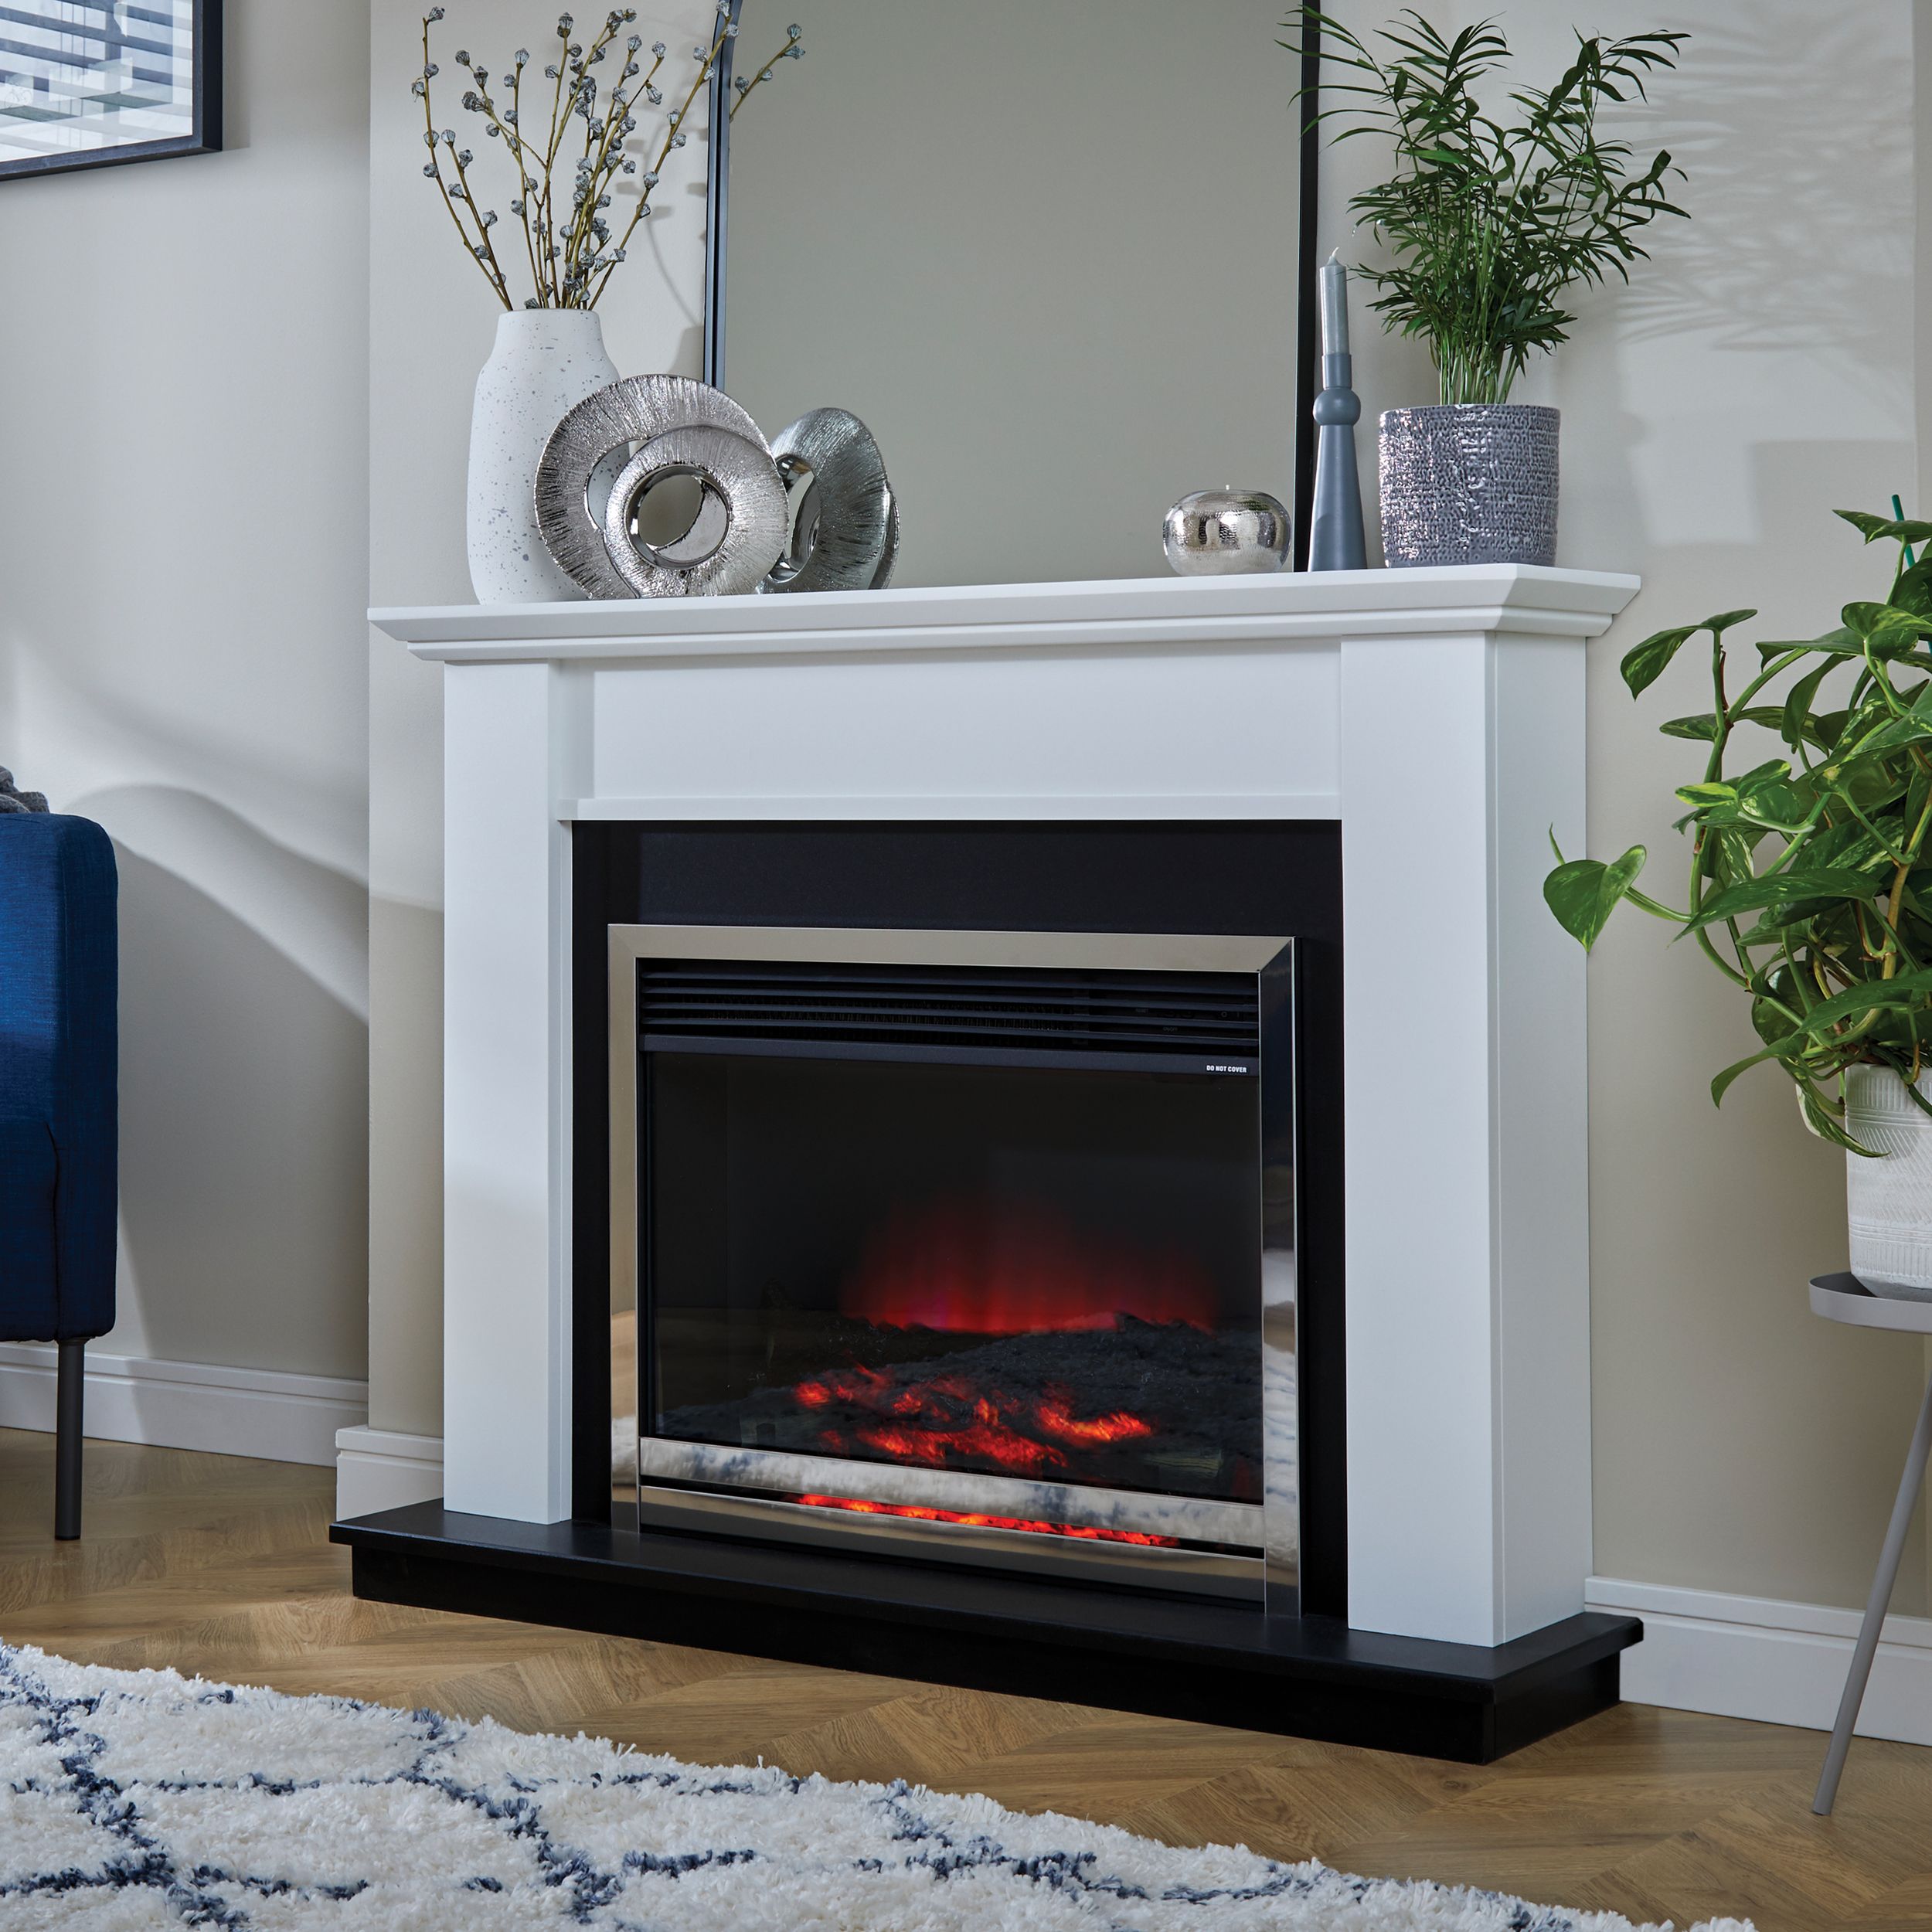 Suncrest Antigua White MDF & stainless steel Freestanding Electric fire suite